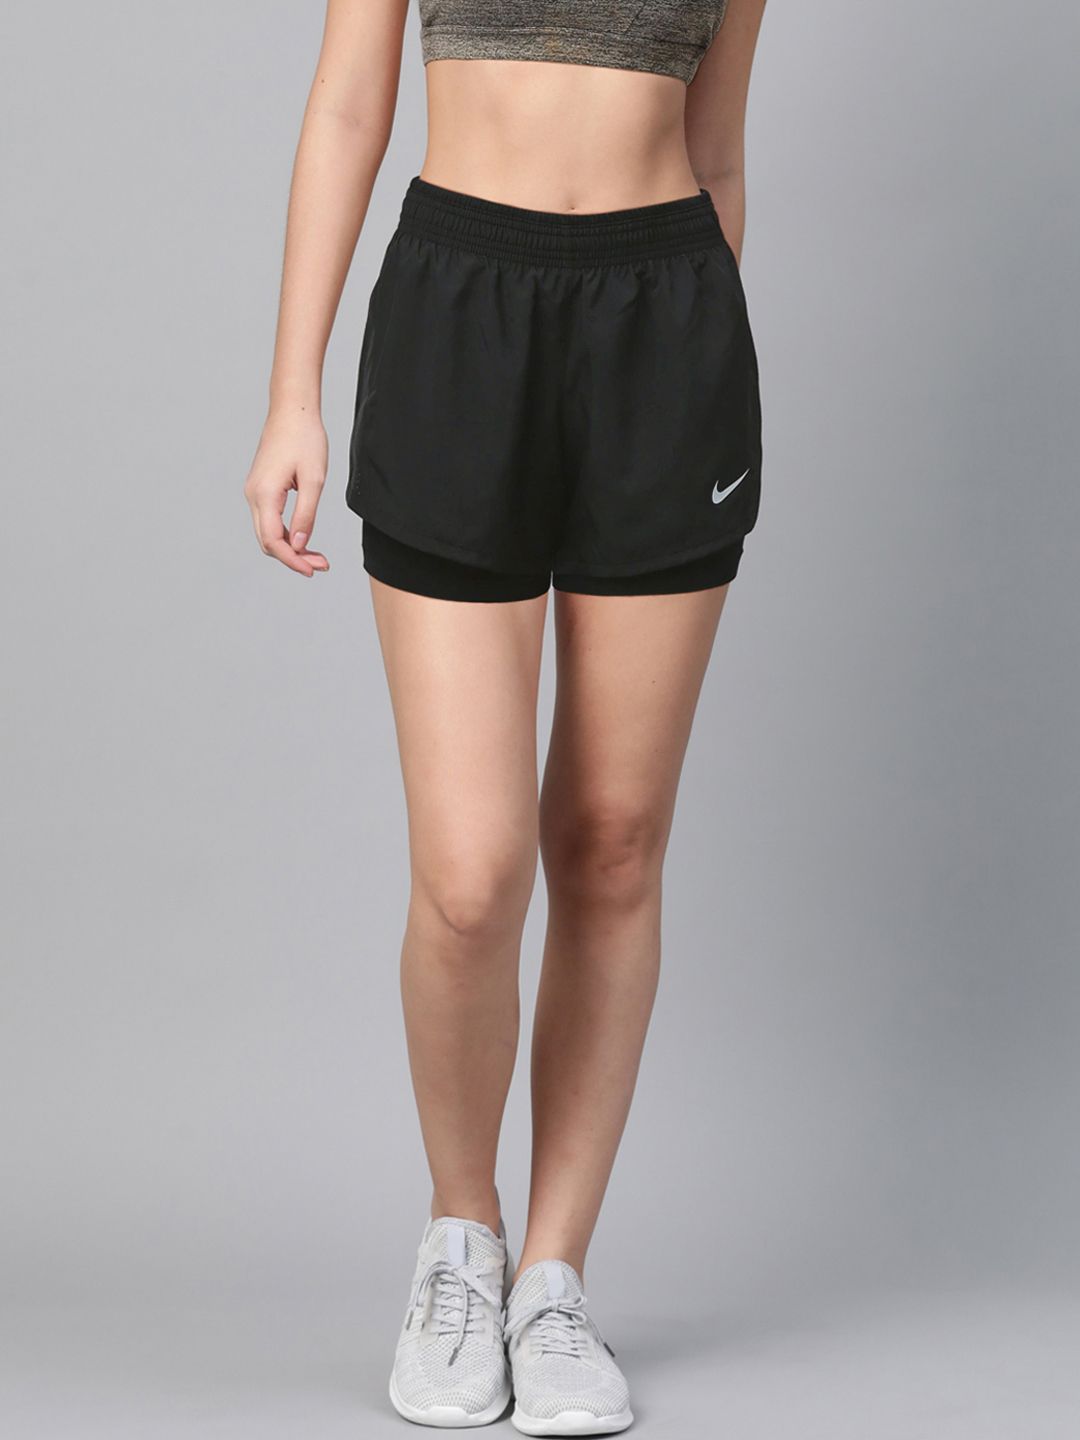 Nike Women Black 2-In-1 Solid Dri-Fit Running Shorts Price in India